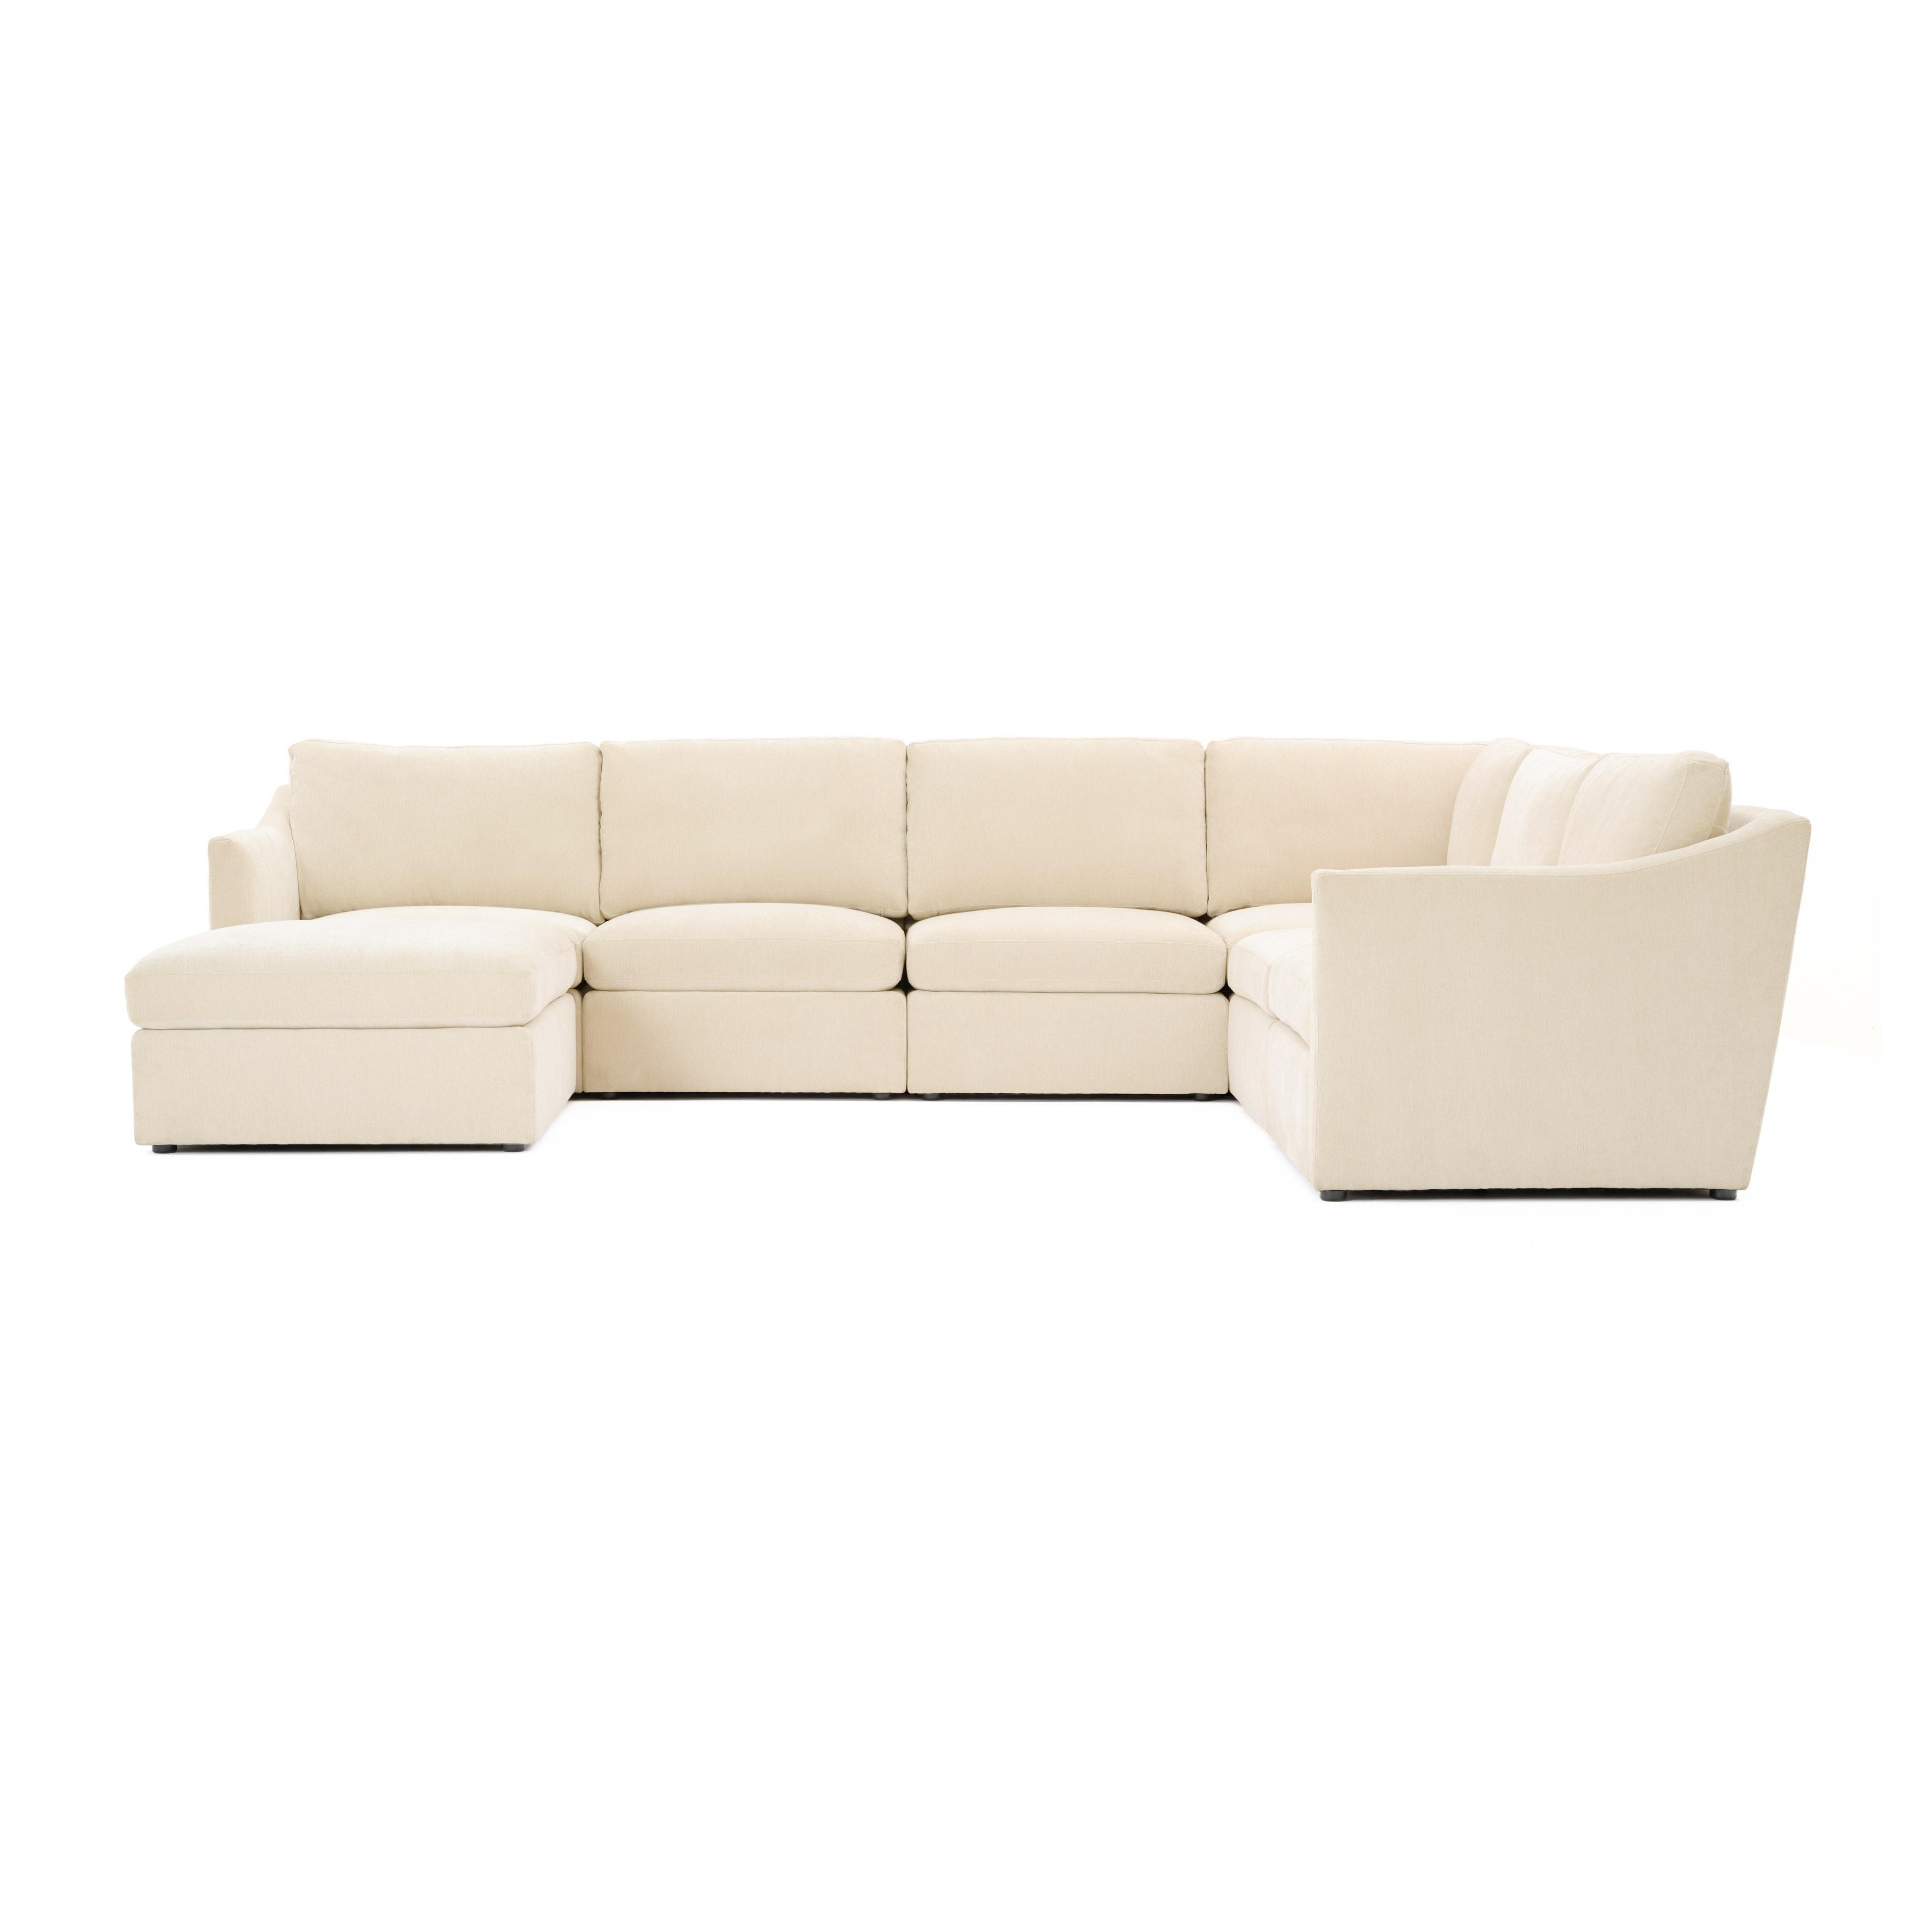 Aiden Beige Modular Large Chaise Sectional - Image 1